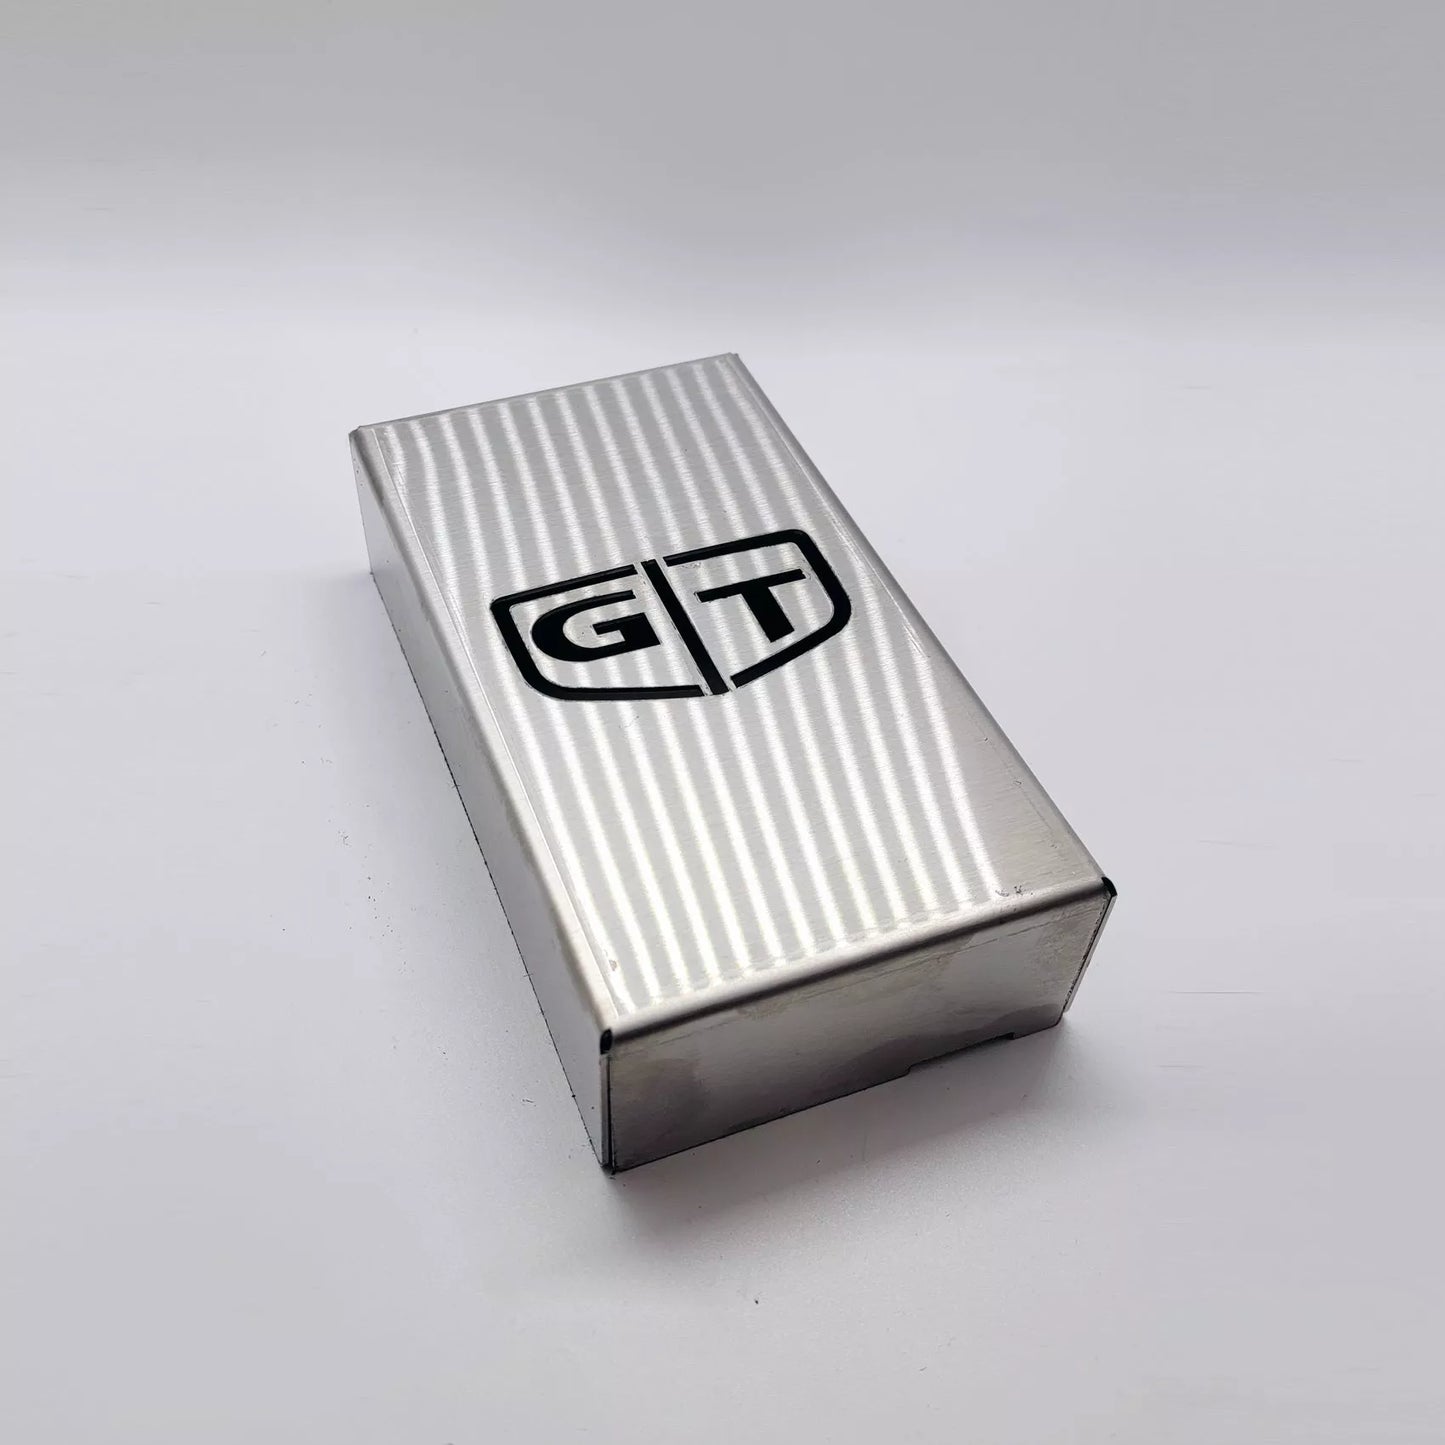 
                  
                    R32 Skyline Stainless Fuse Box Cover Dress-Up Boosted Int'l GT  
                  
                